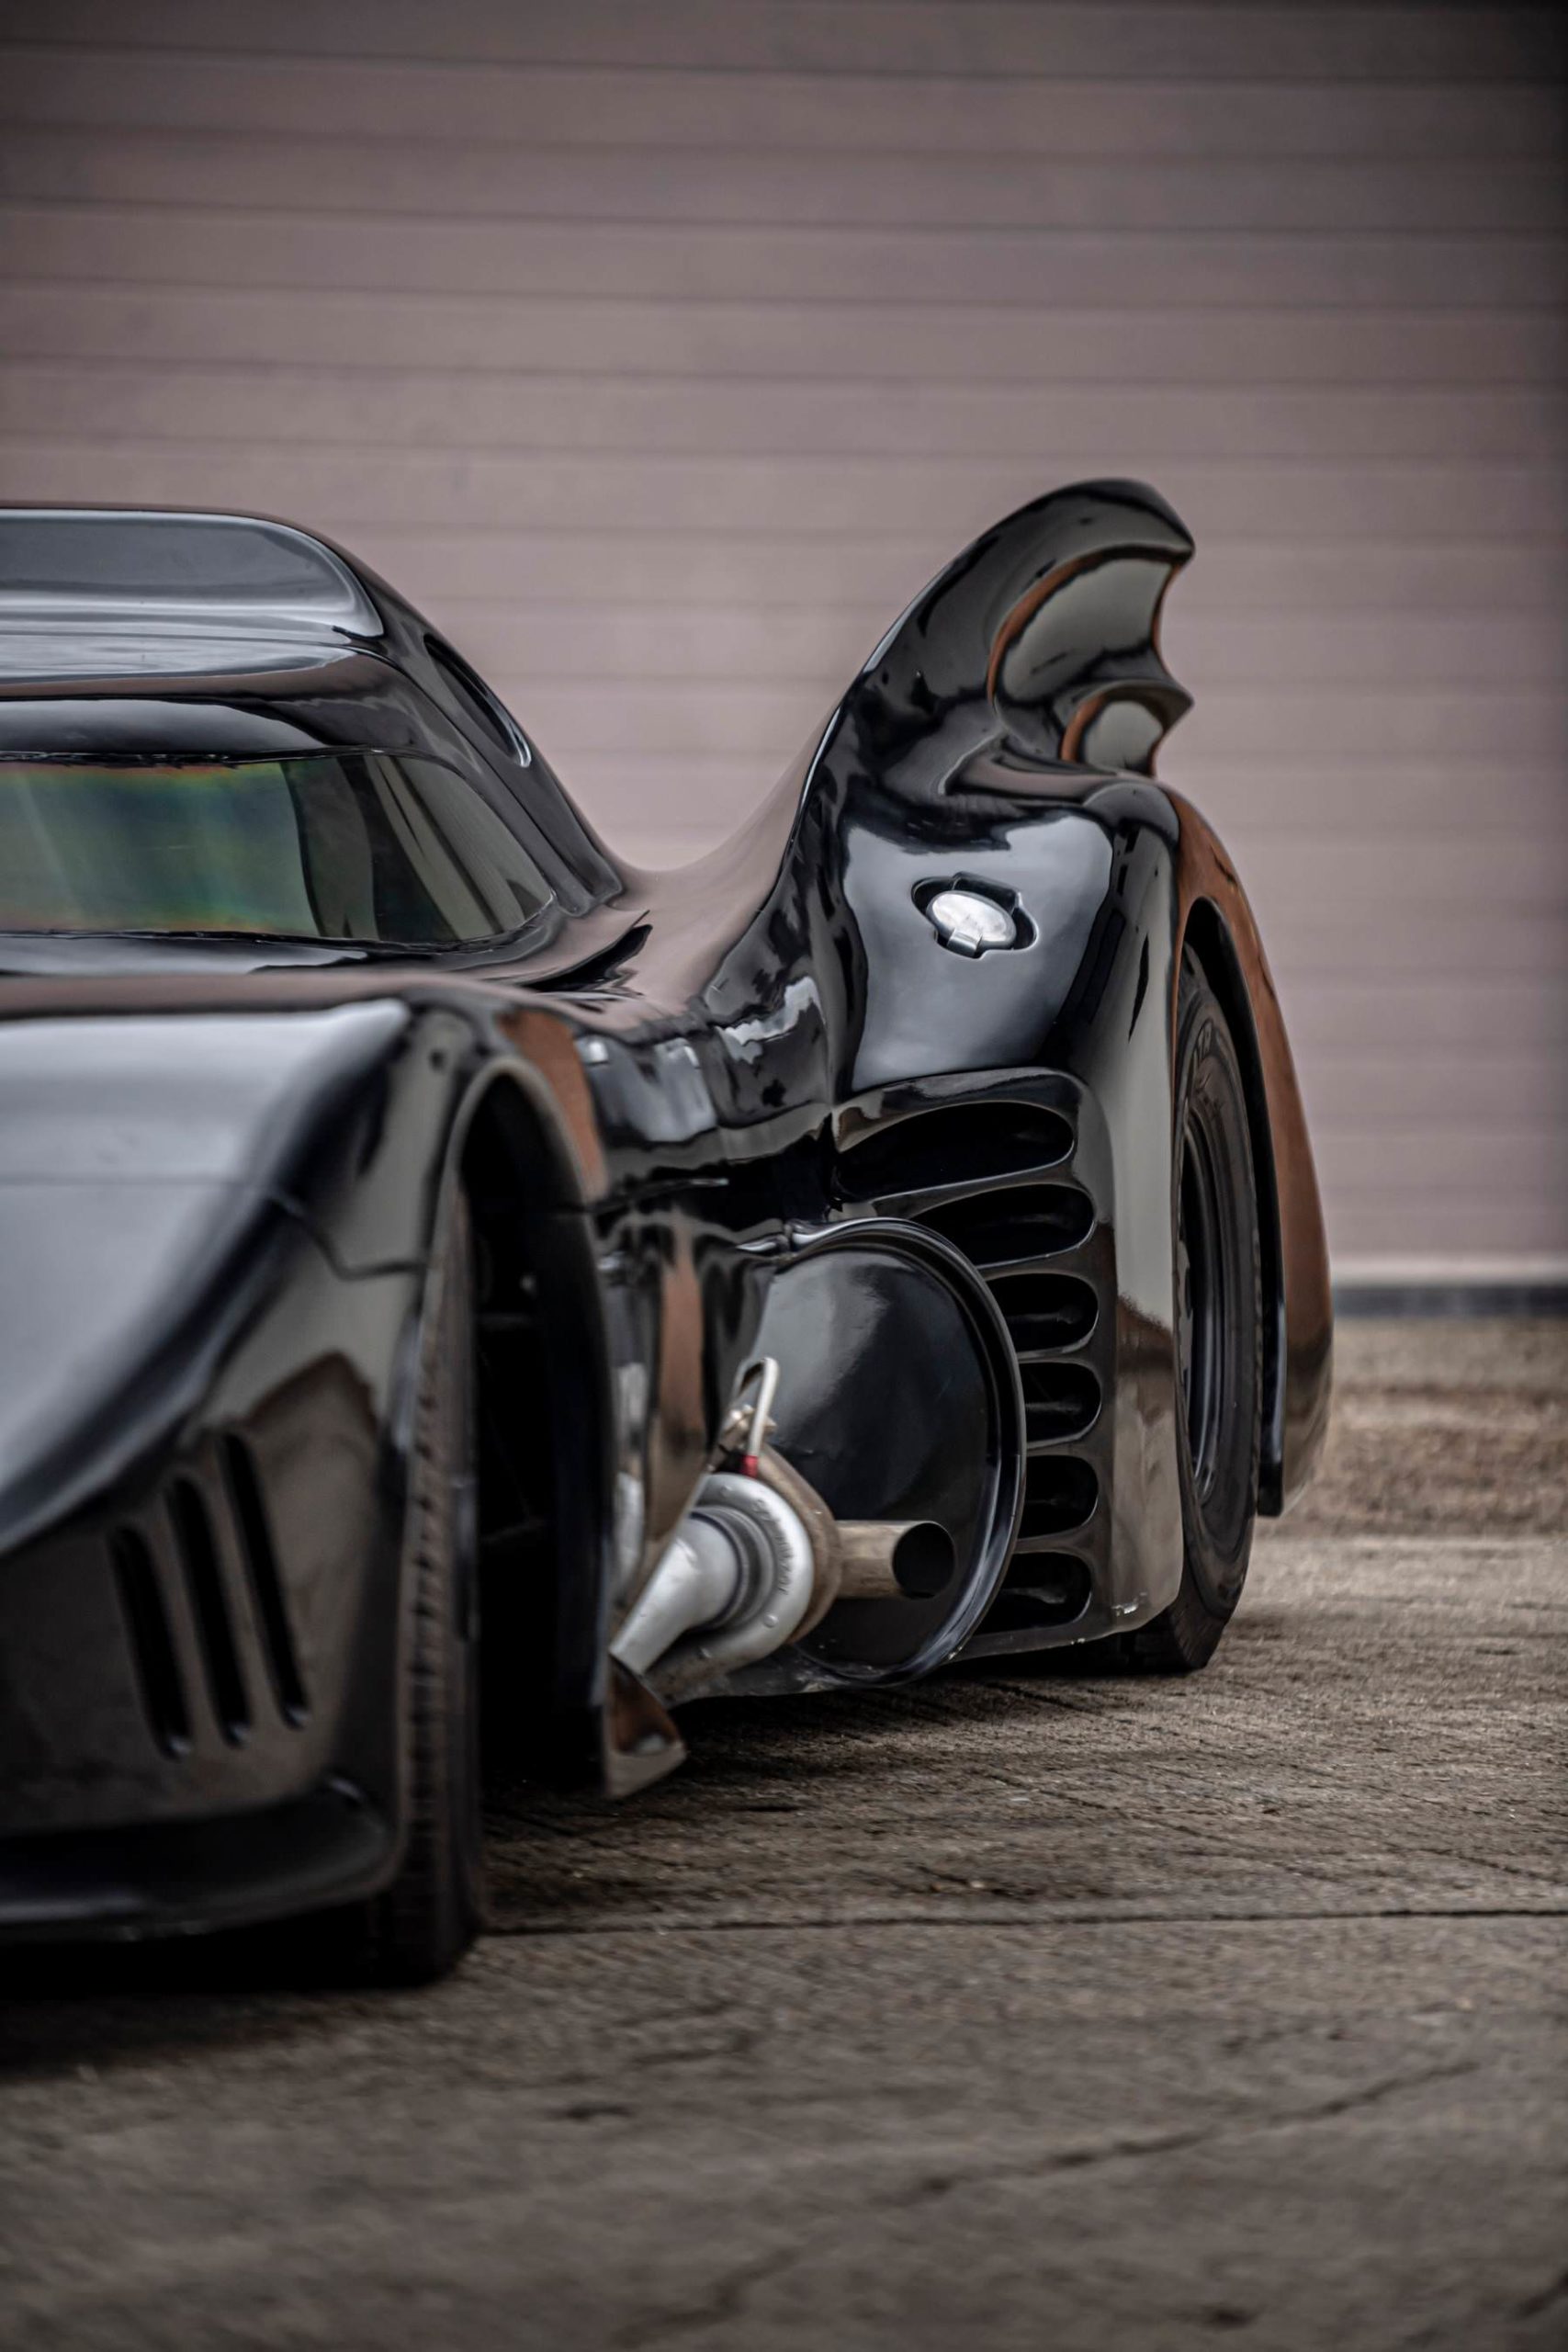 Buy this Batmobile re-creation for the price of a Honda Accord